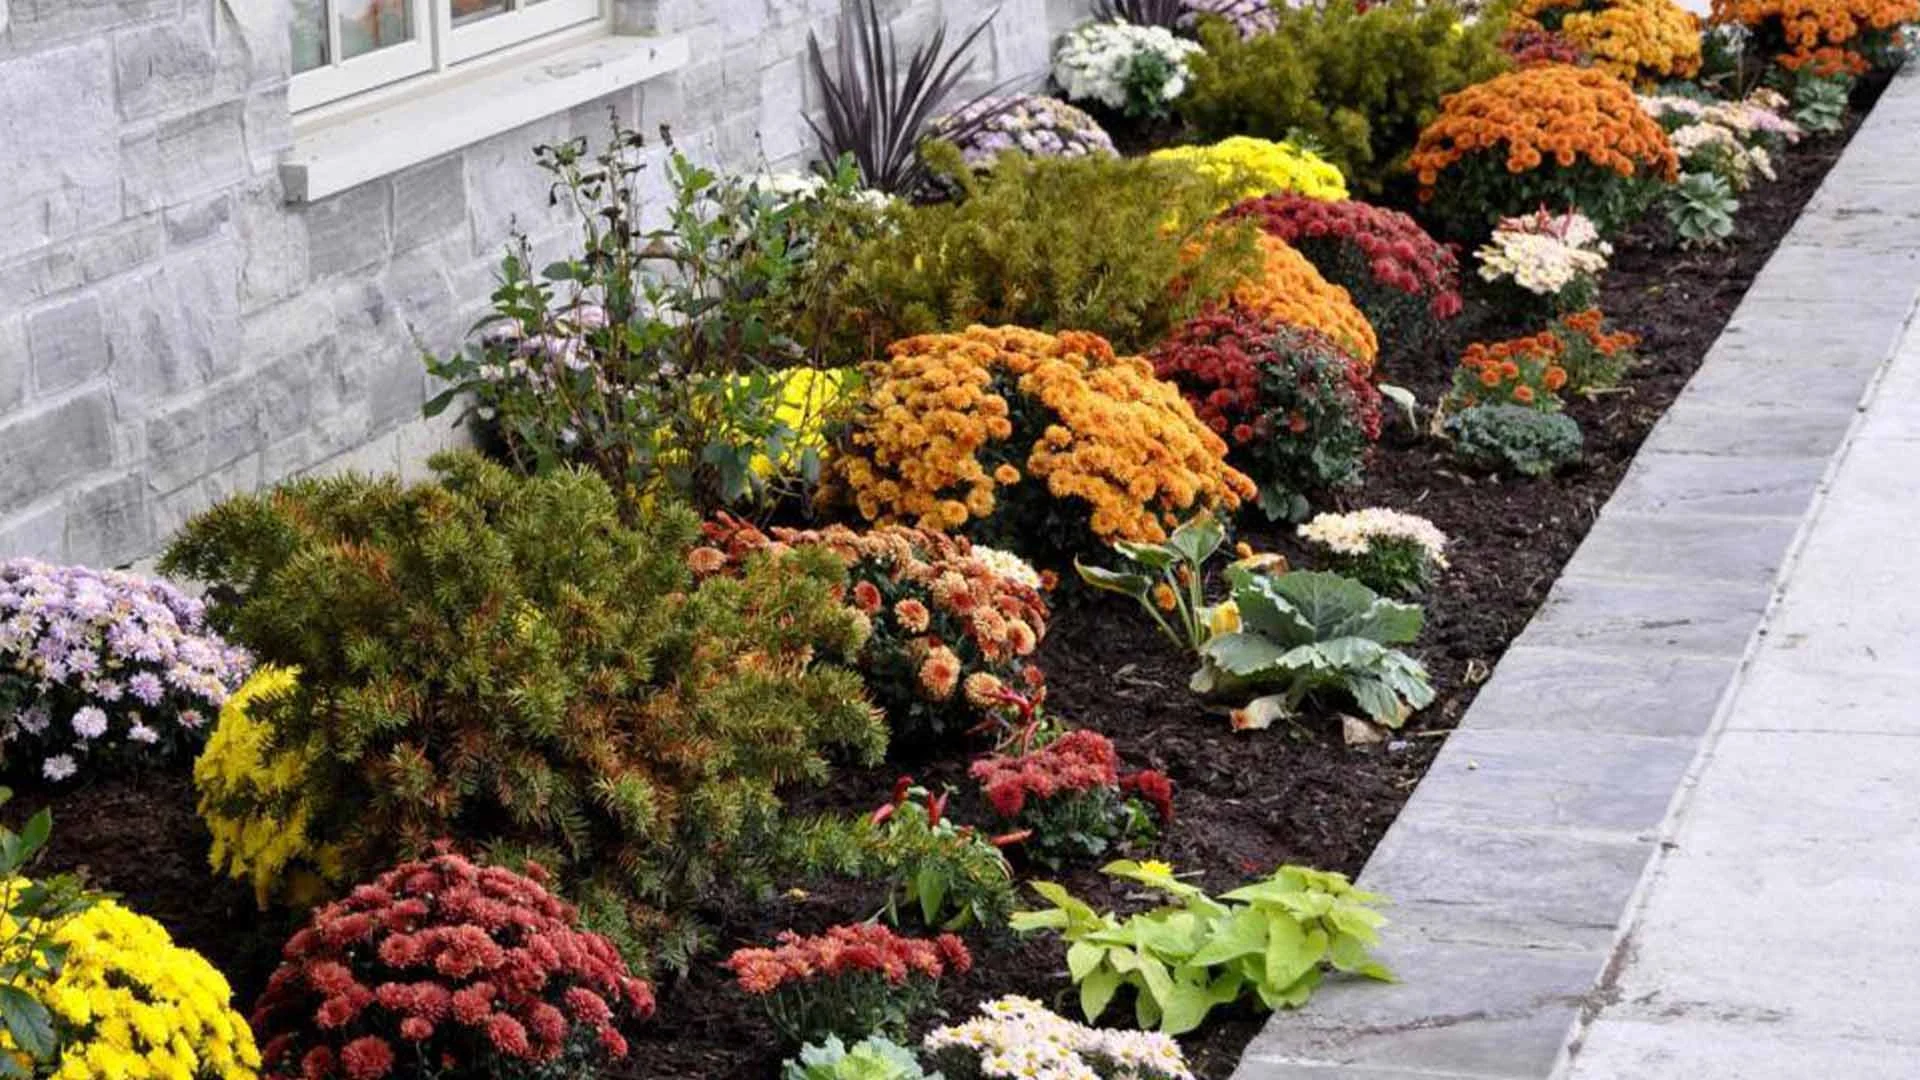 Landscape bed with a variety of plants and colors in Downingtown, PA.